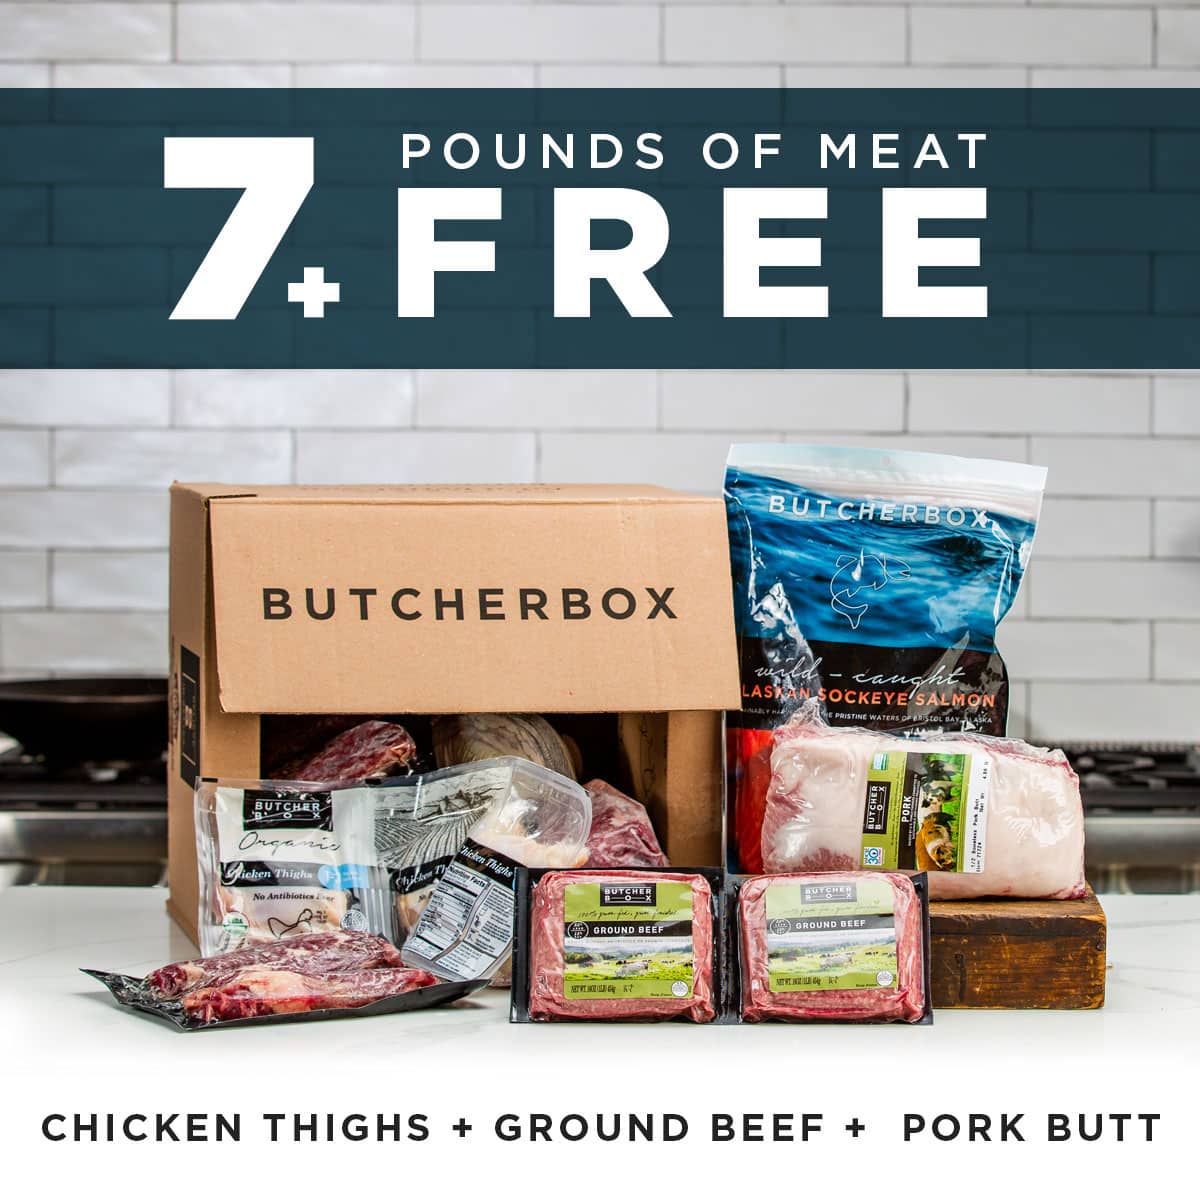 butcherbox january 2021 deal get 7 pounds of free meat